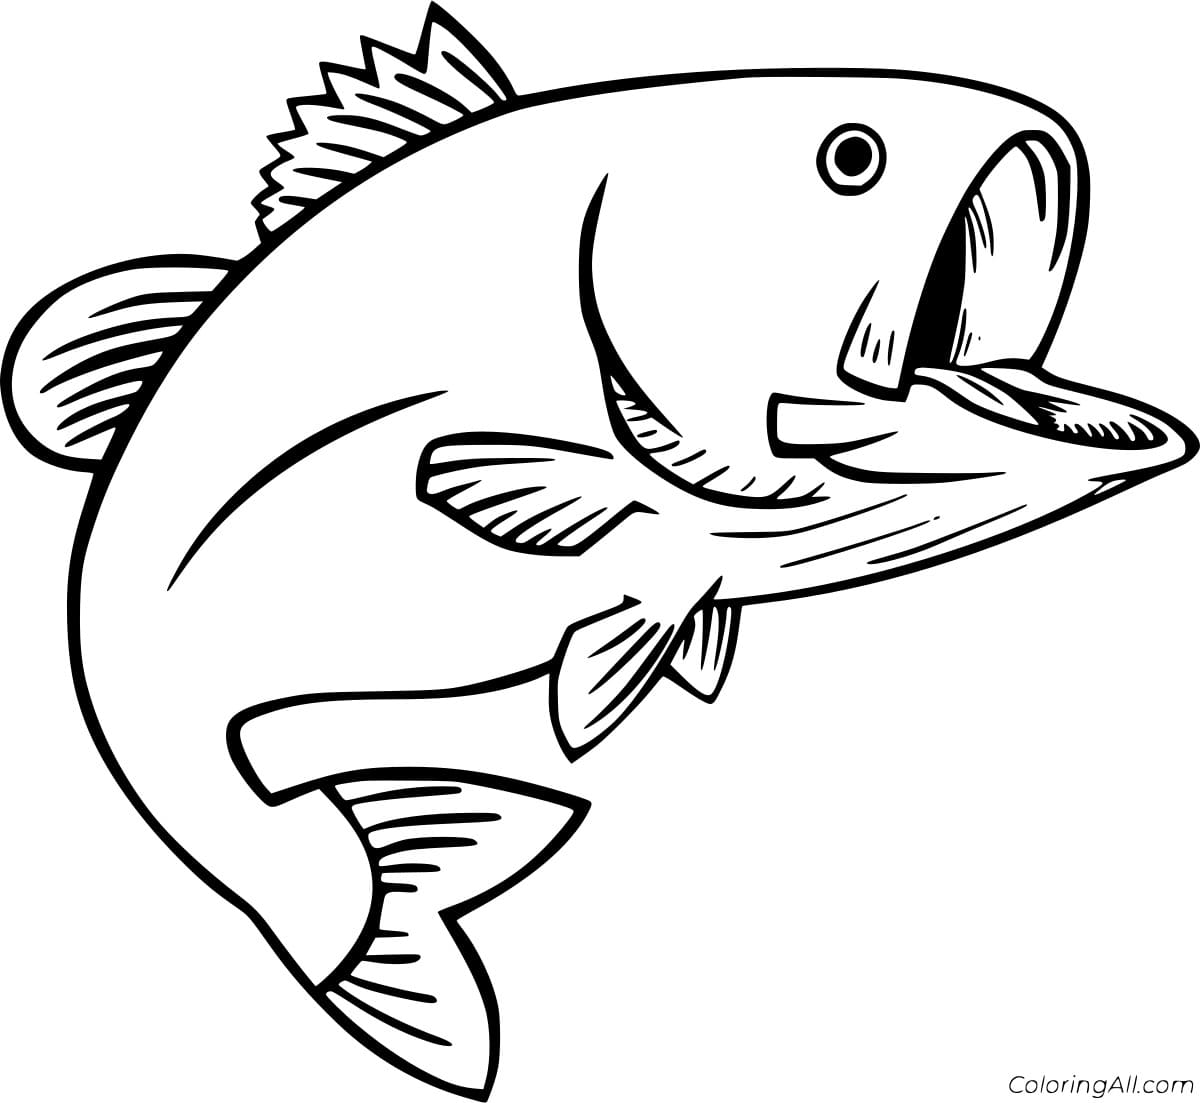 Yellow Bass Image Coloring Page